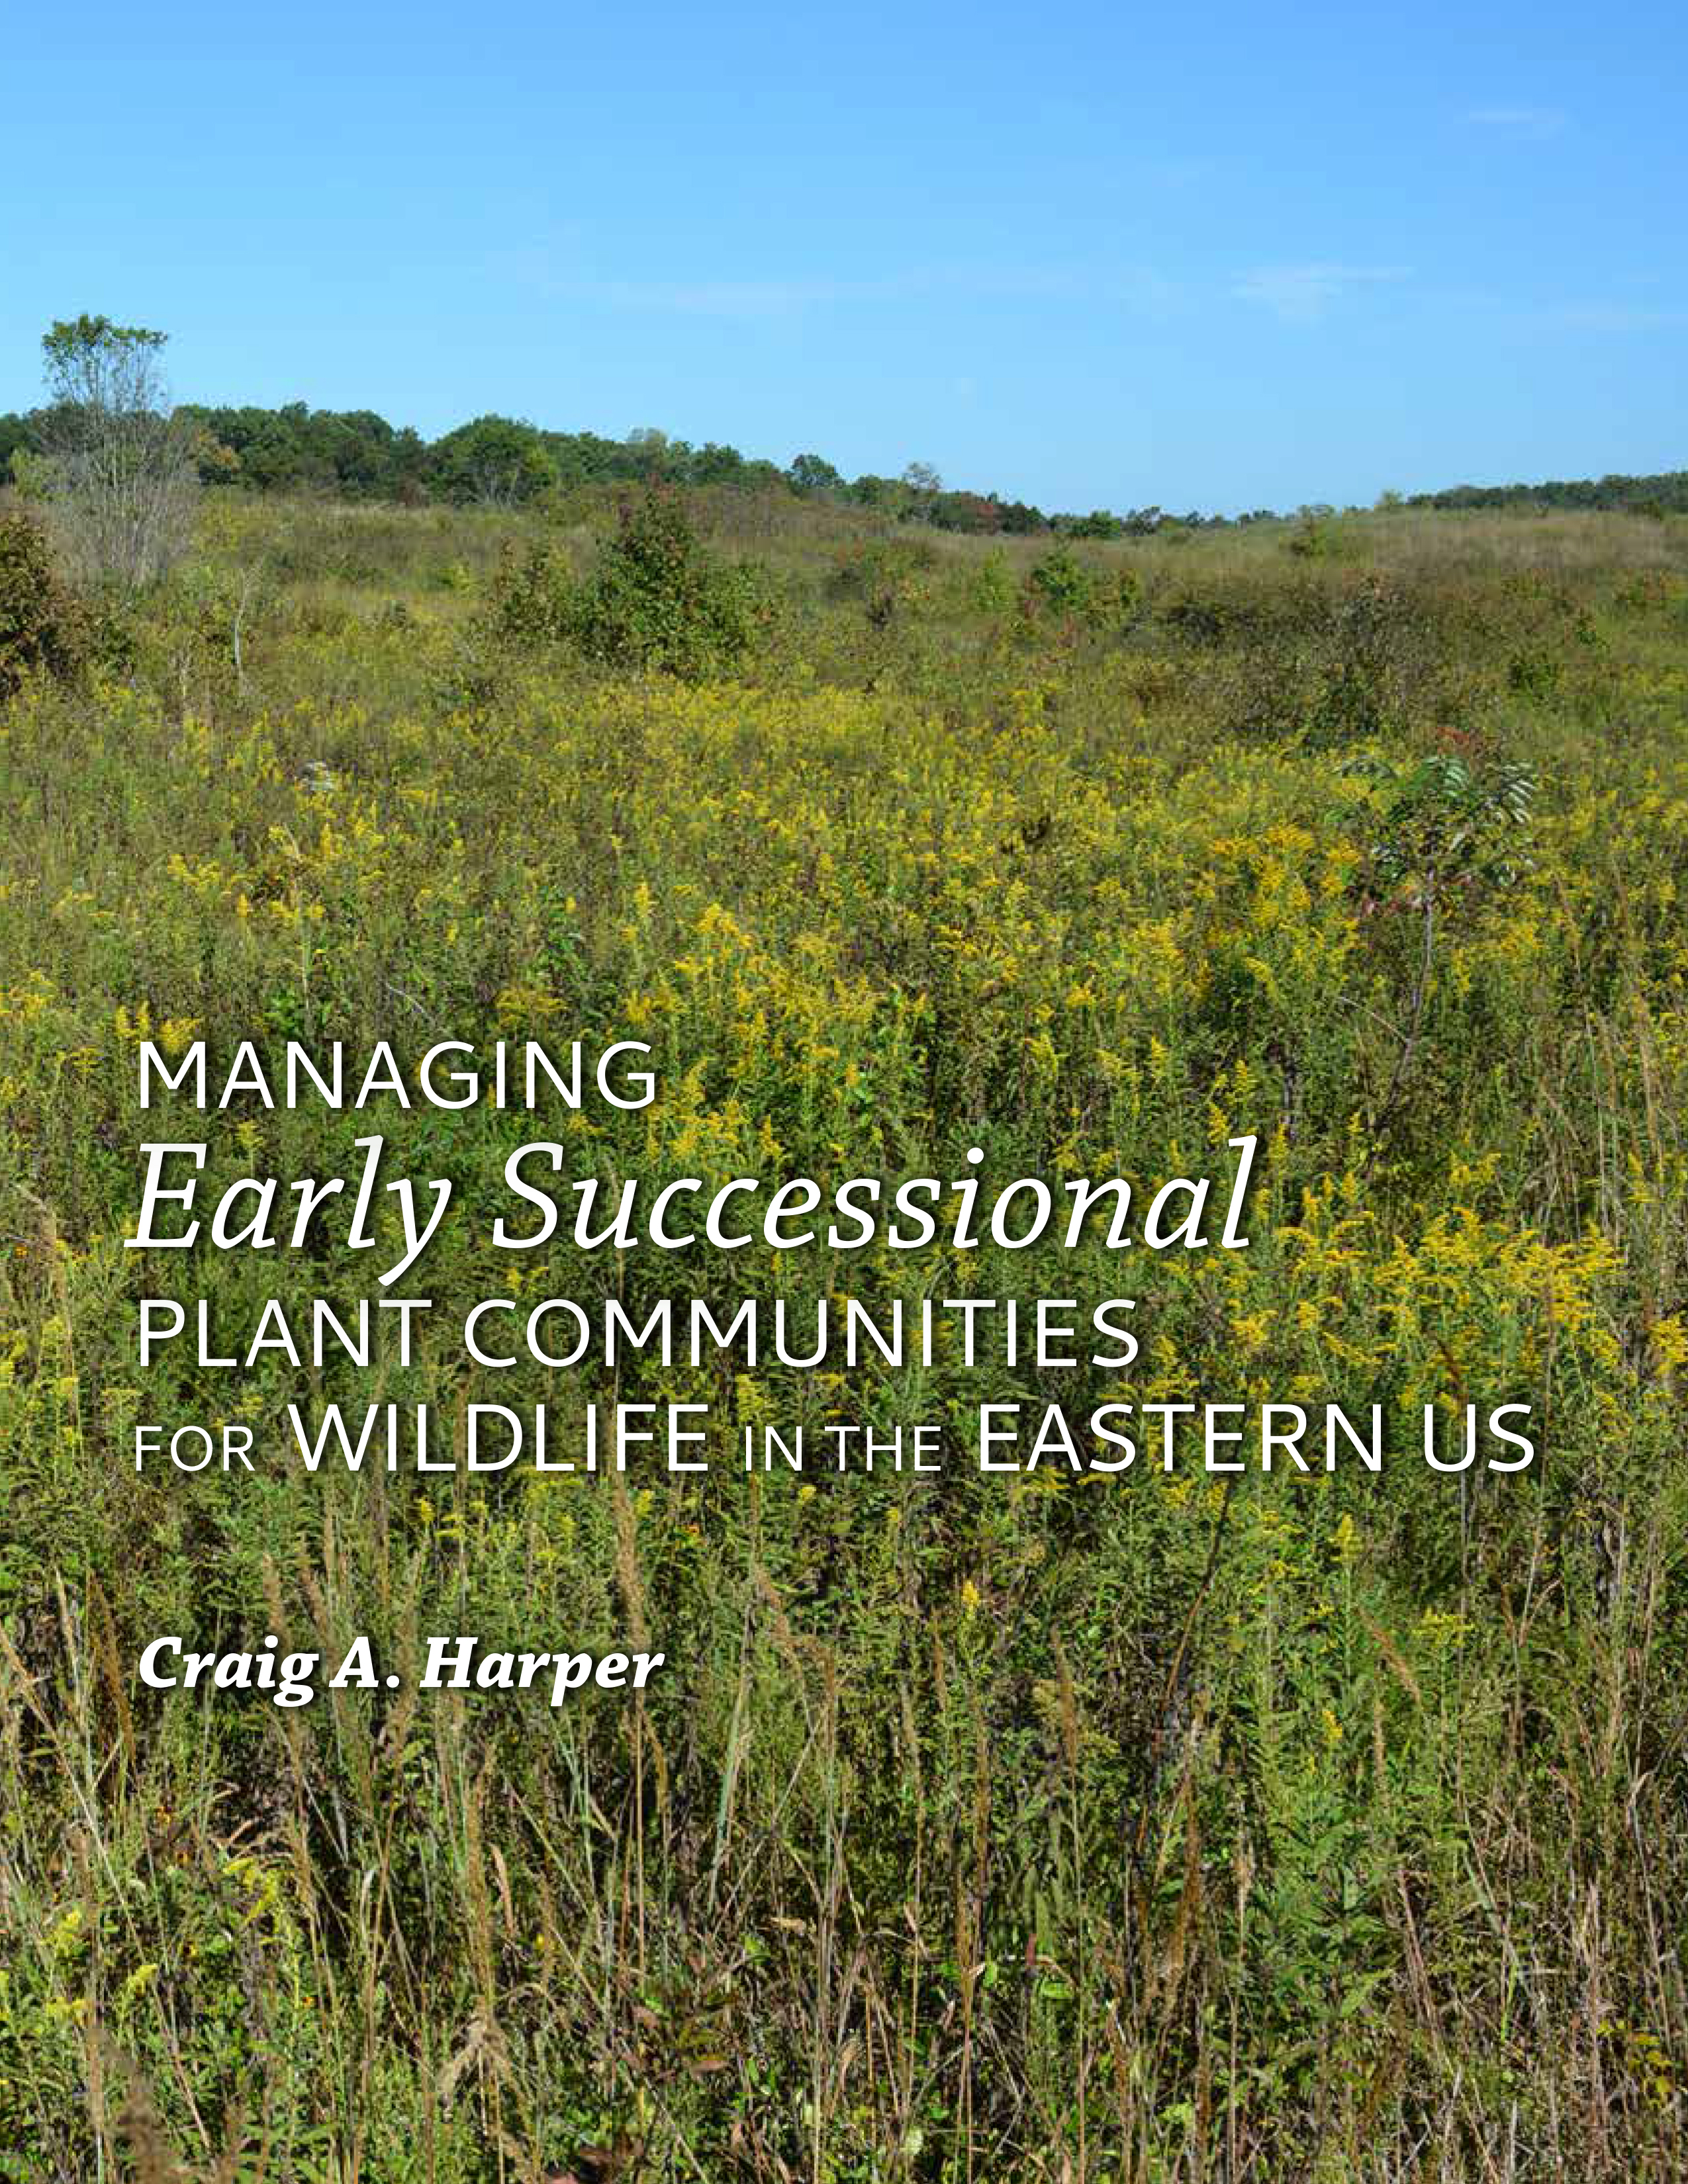 Managing Early Successional Plant Communities for Wildlife in the Eastern US